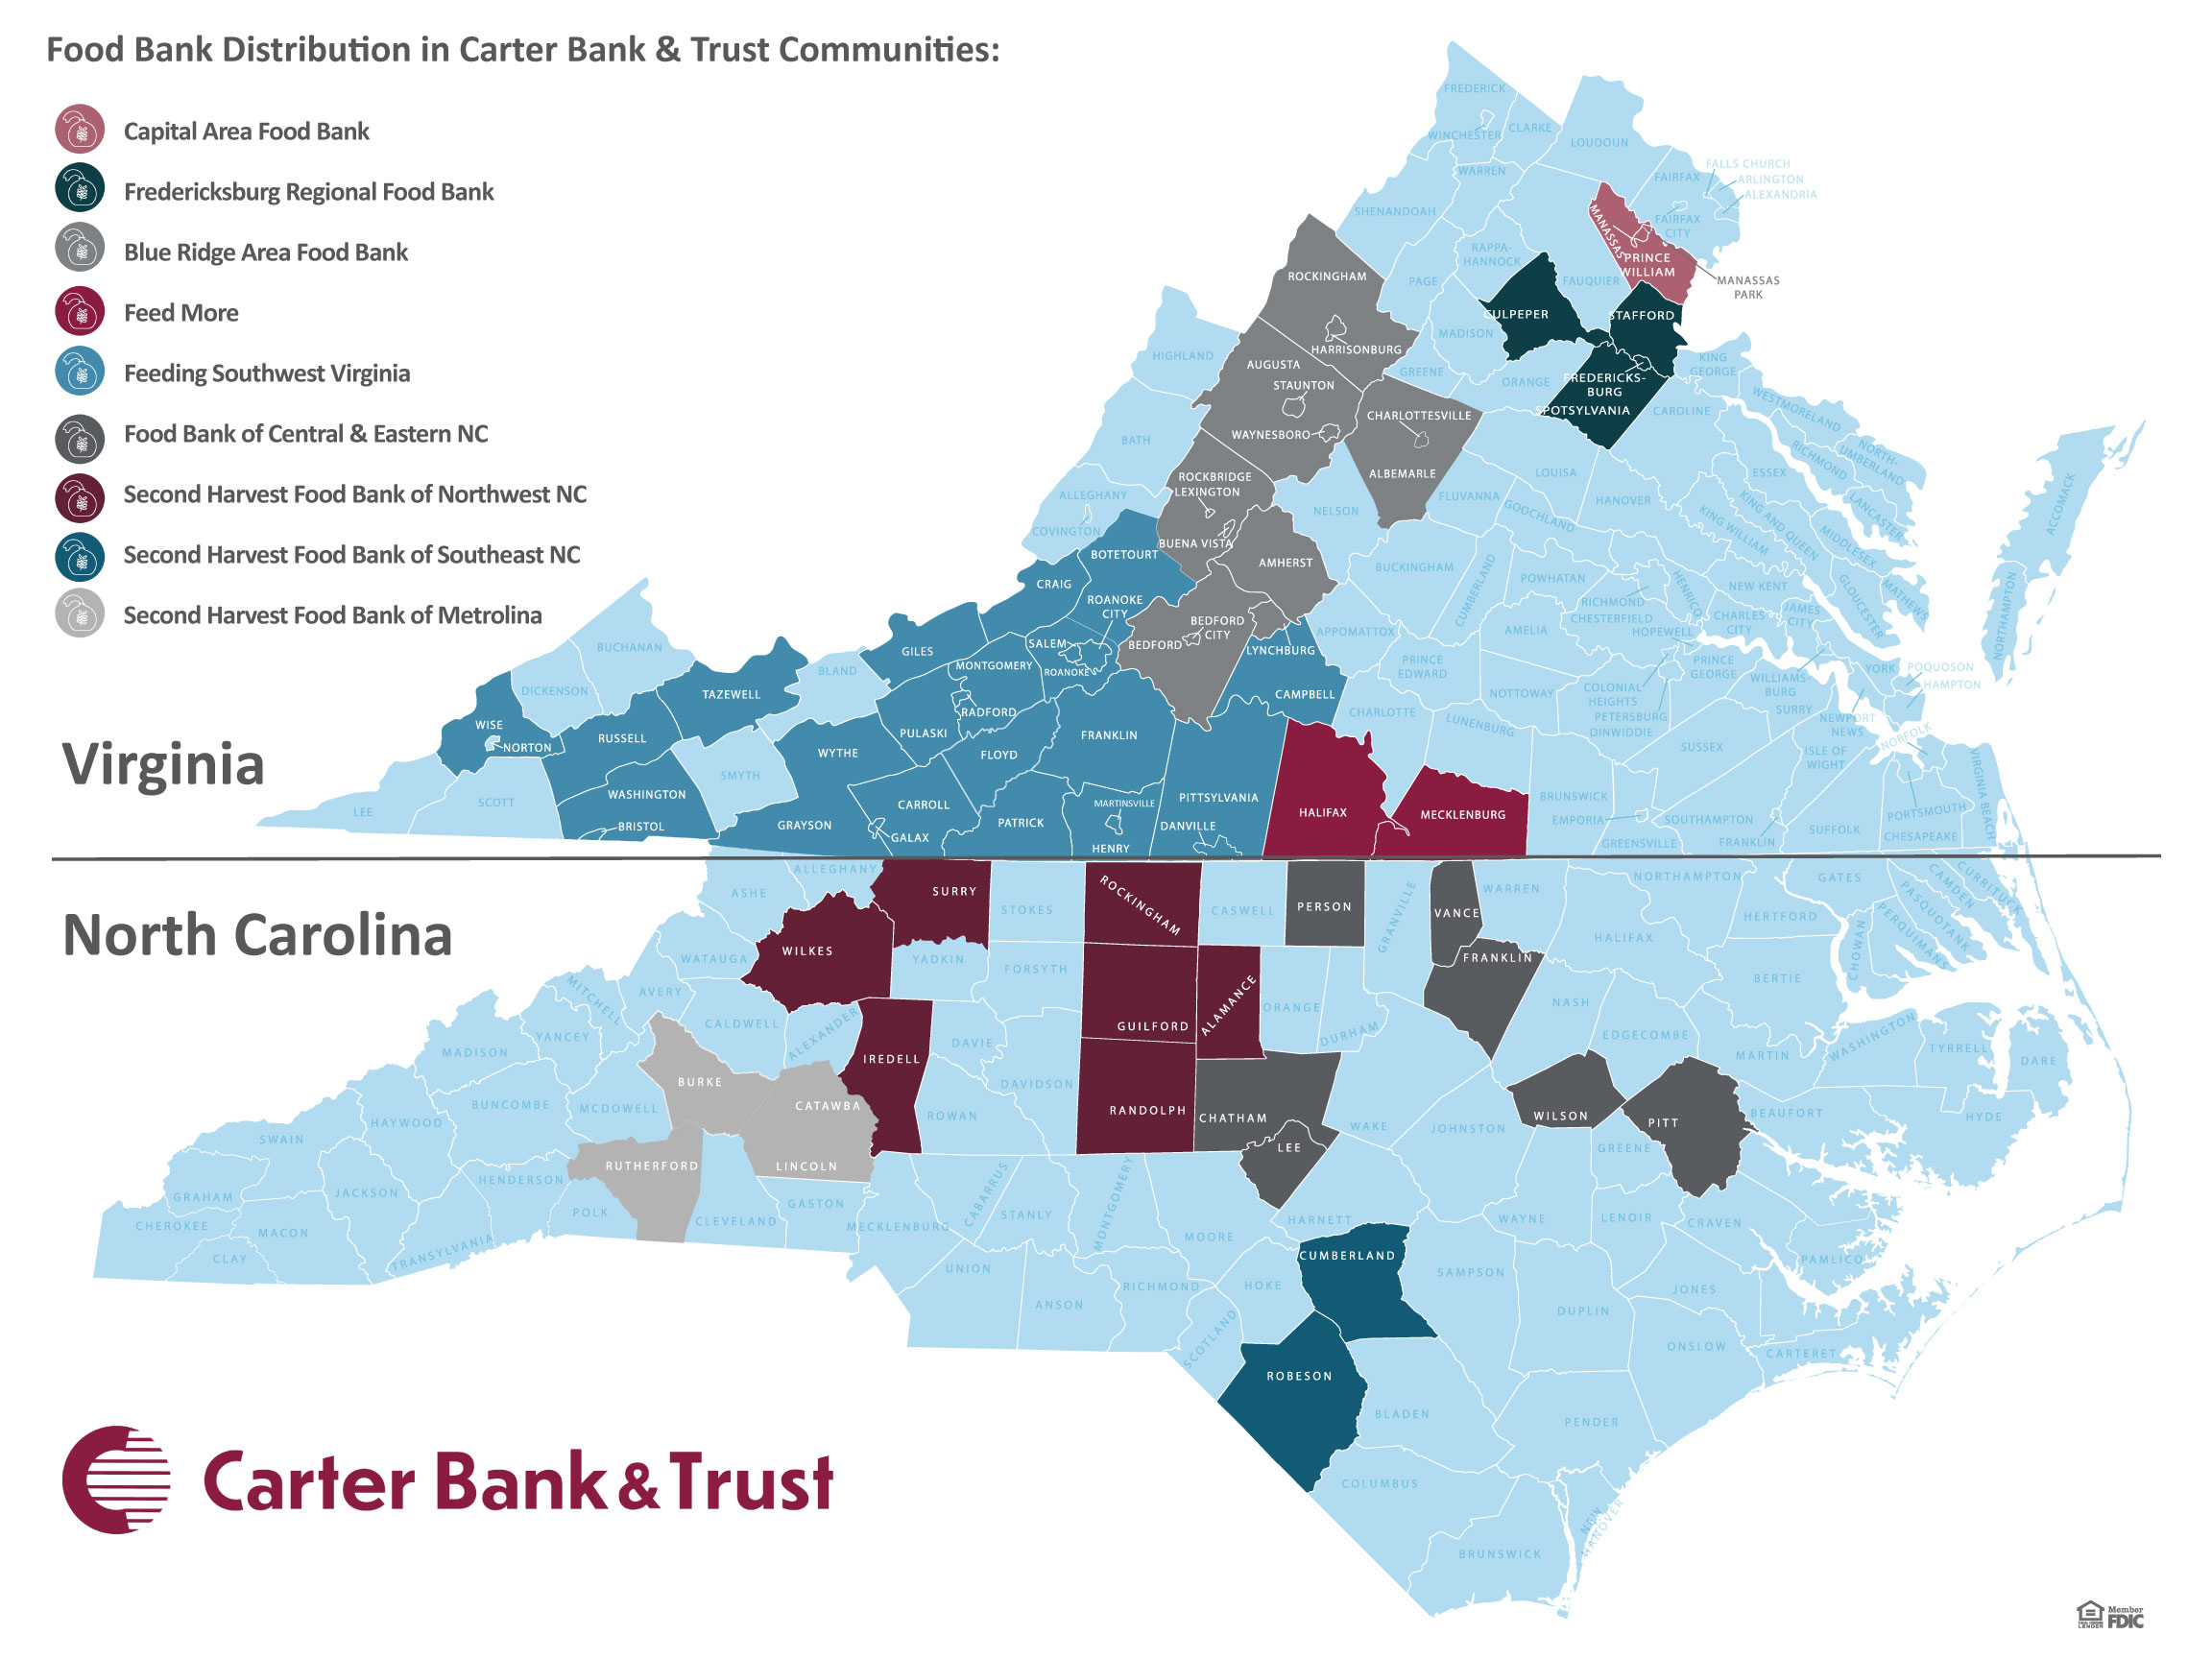 Carter Bank & Trust, Thursday, May 21, 2020, Press release picture